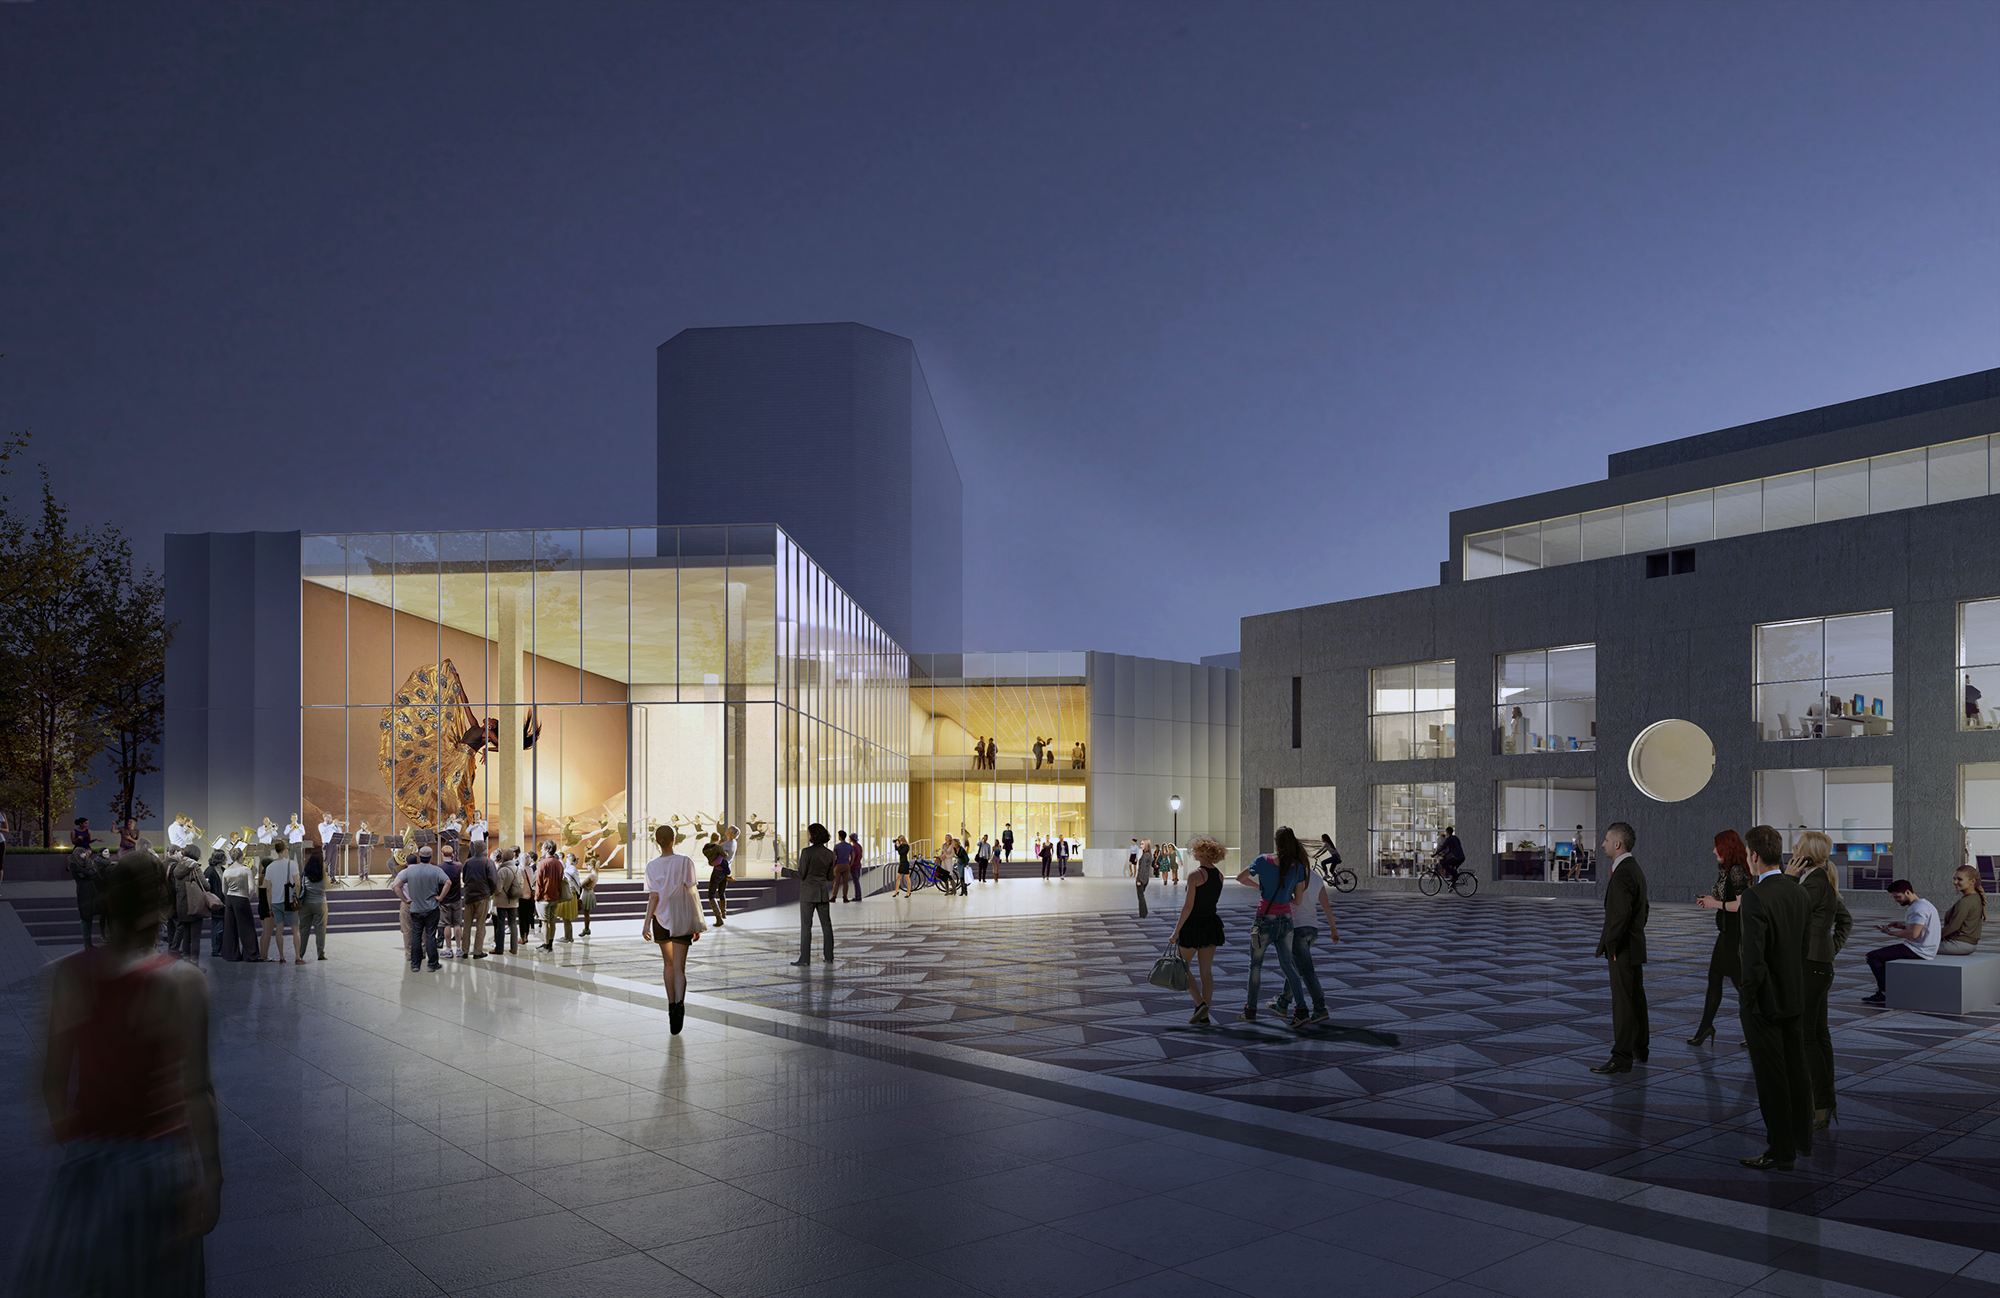 Rendering of a new plaza exterior at night.